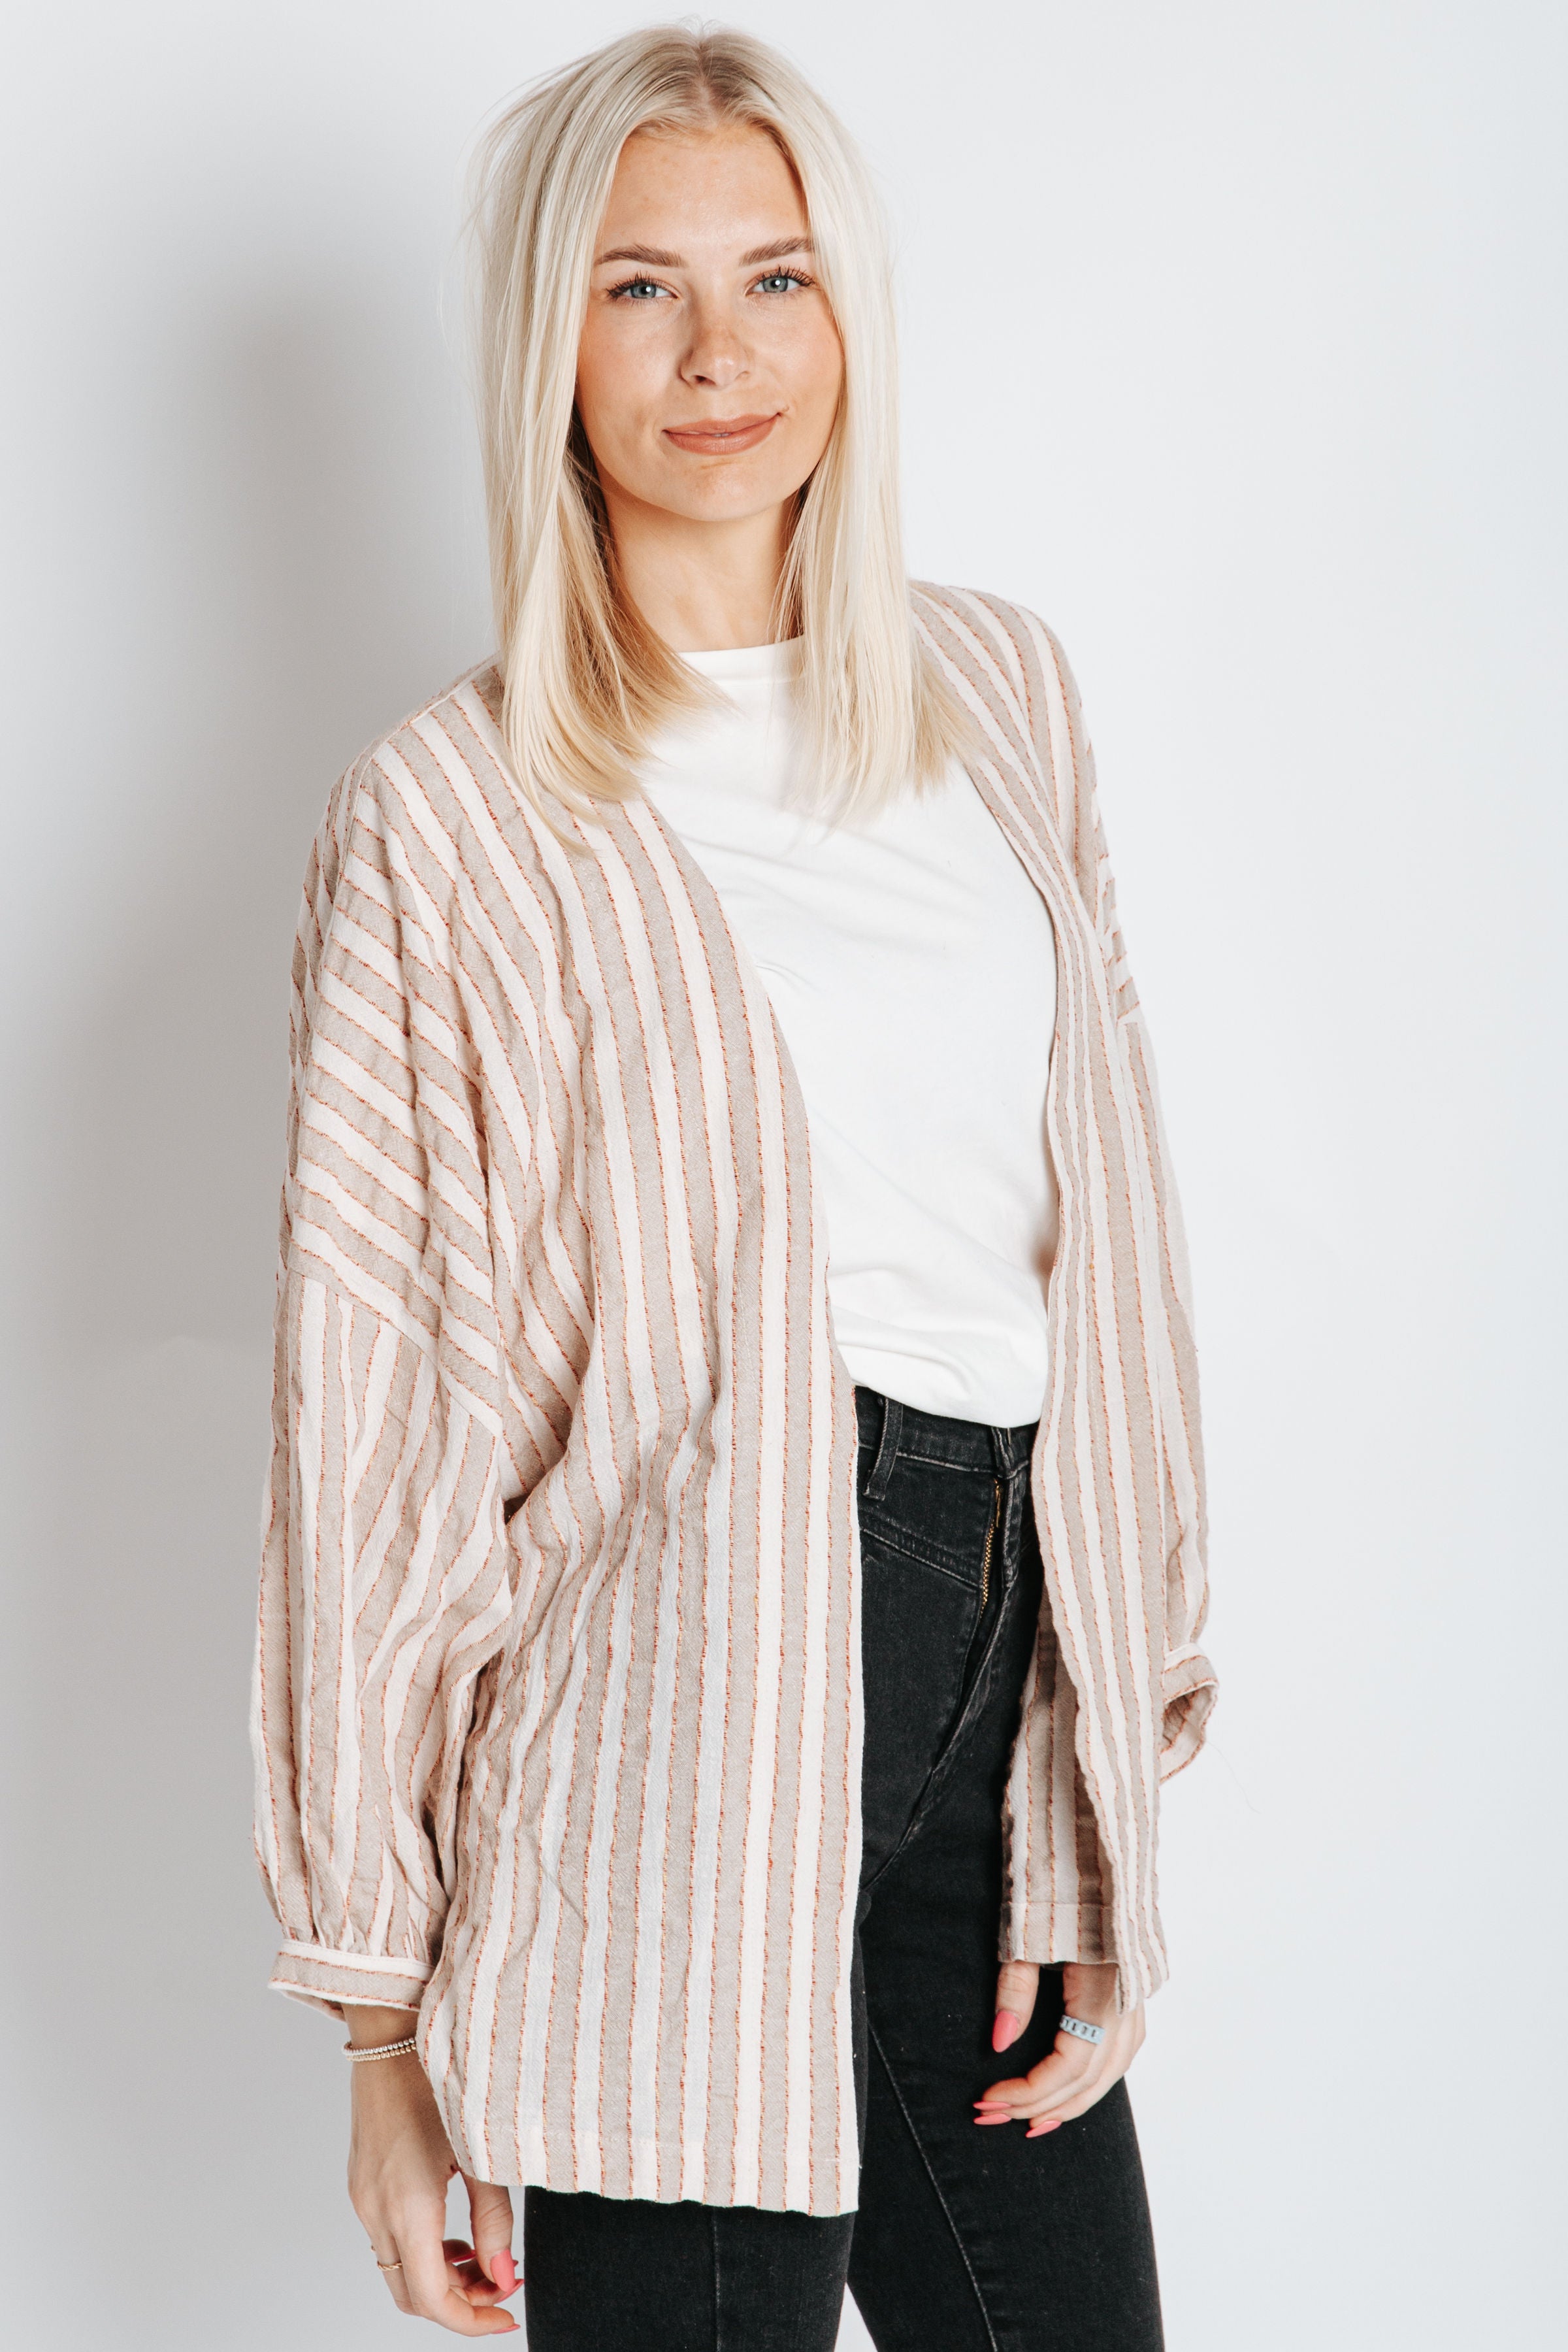 The Perkins Striped Open Cardigan in Taupe